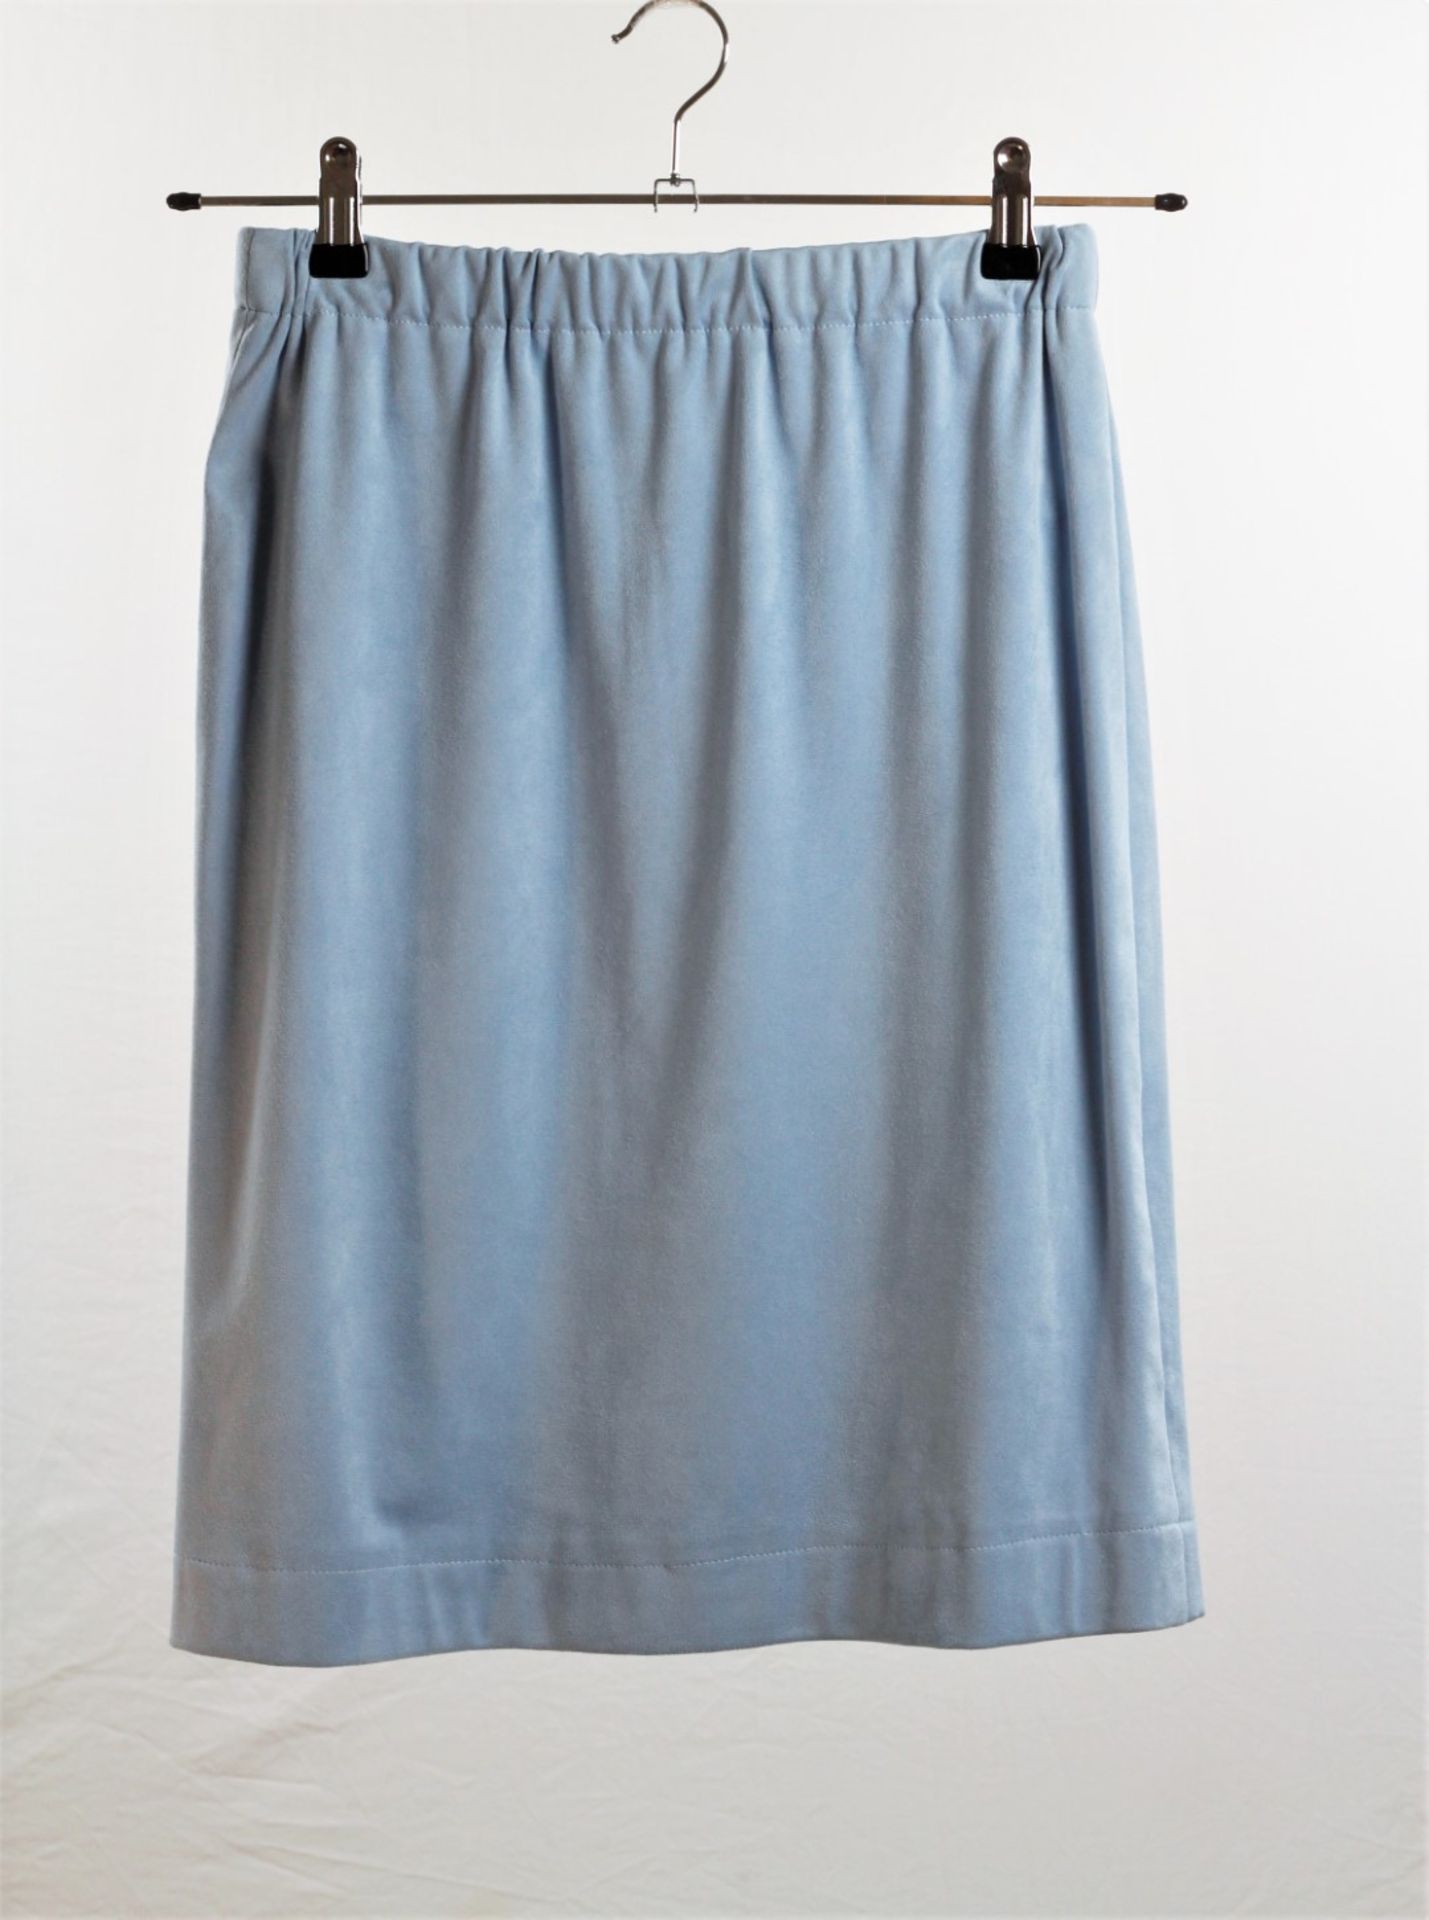 1 x Boutique Le Duc Baby Blue Skirt - From a High End Clothing Boutique In The - Image 5 of 7